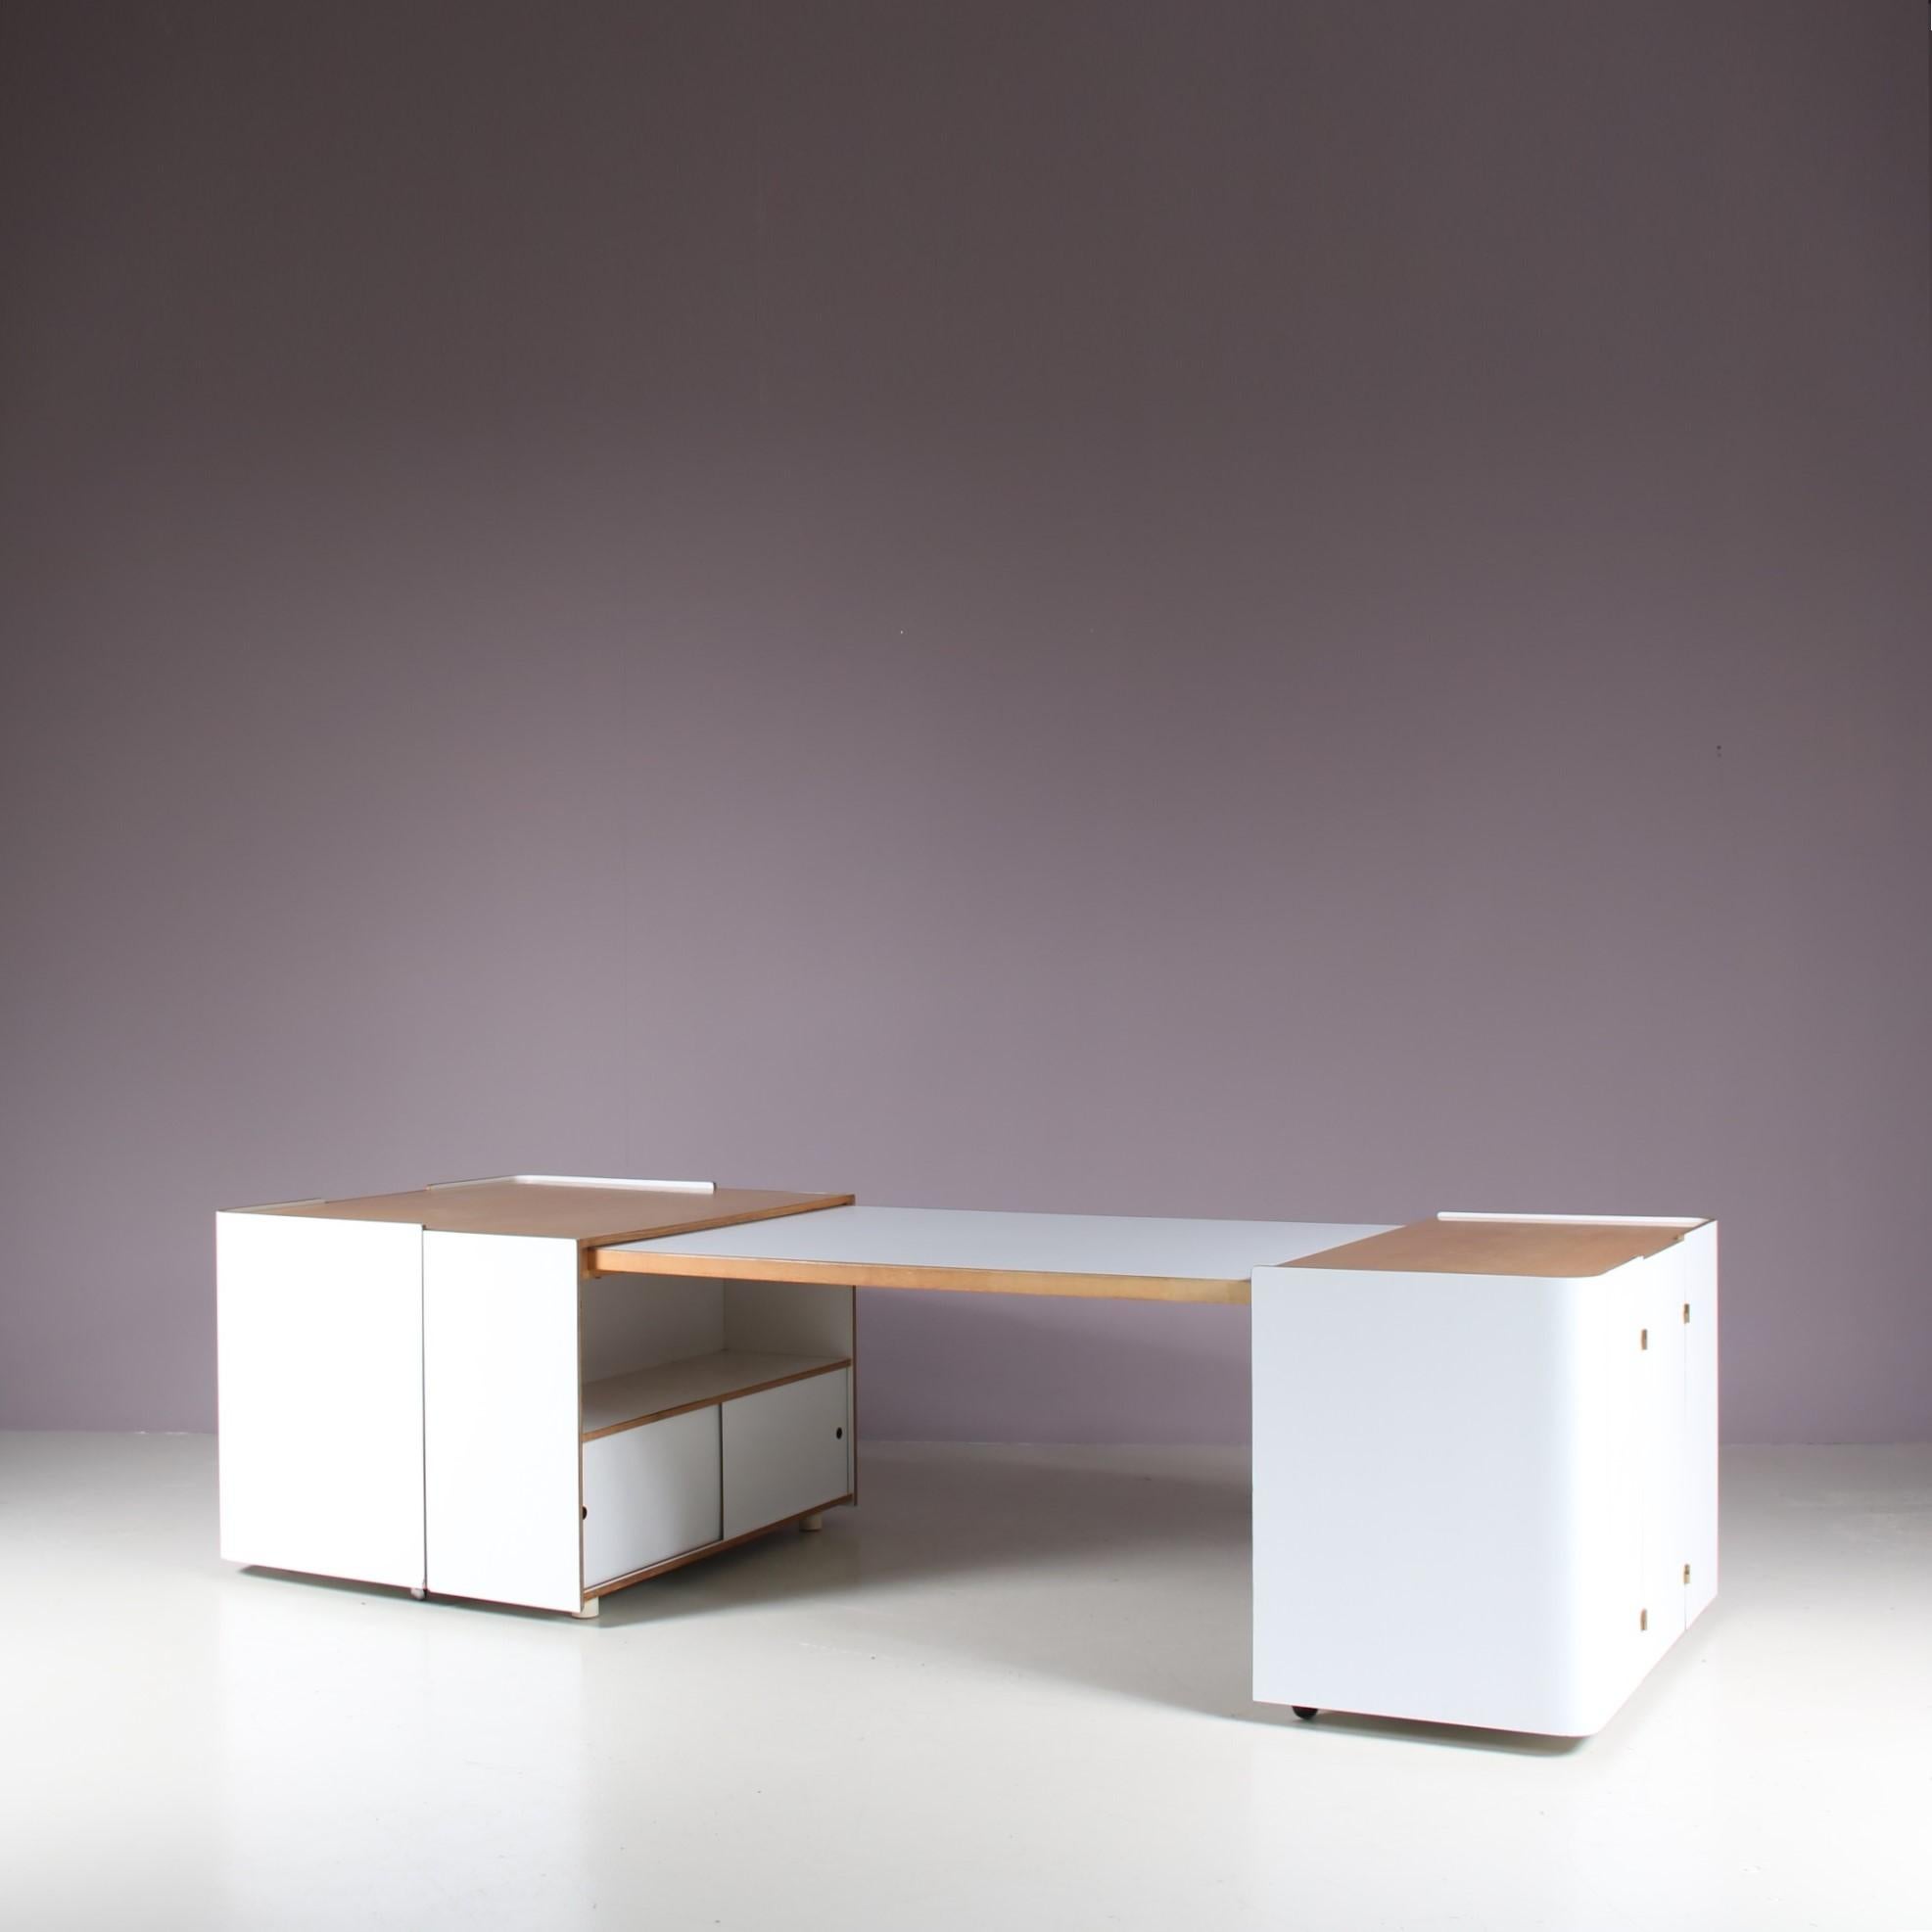 A unique extendible cabinet / desk, designed by Roberto Pamio, Renato Toso & Noti Massari, manufactured by Stilwood in Italy around 1970.

This eye-catching piece is made of beautiful quality wood with white laminated panels, giving it a really nice